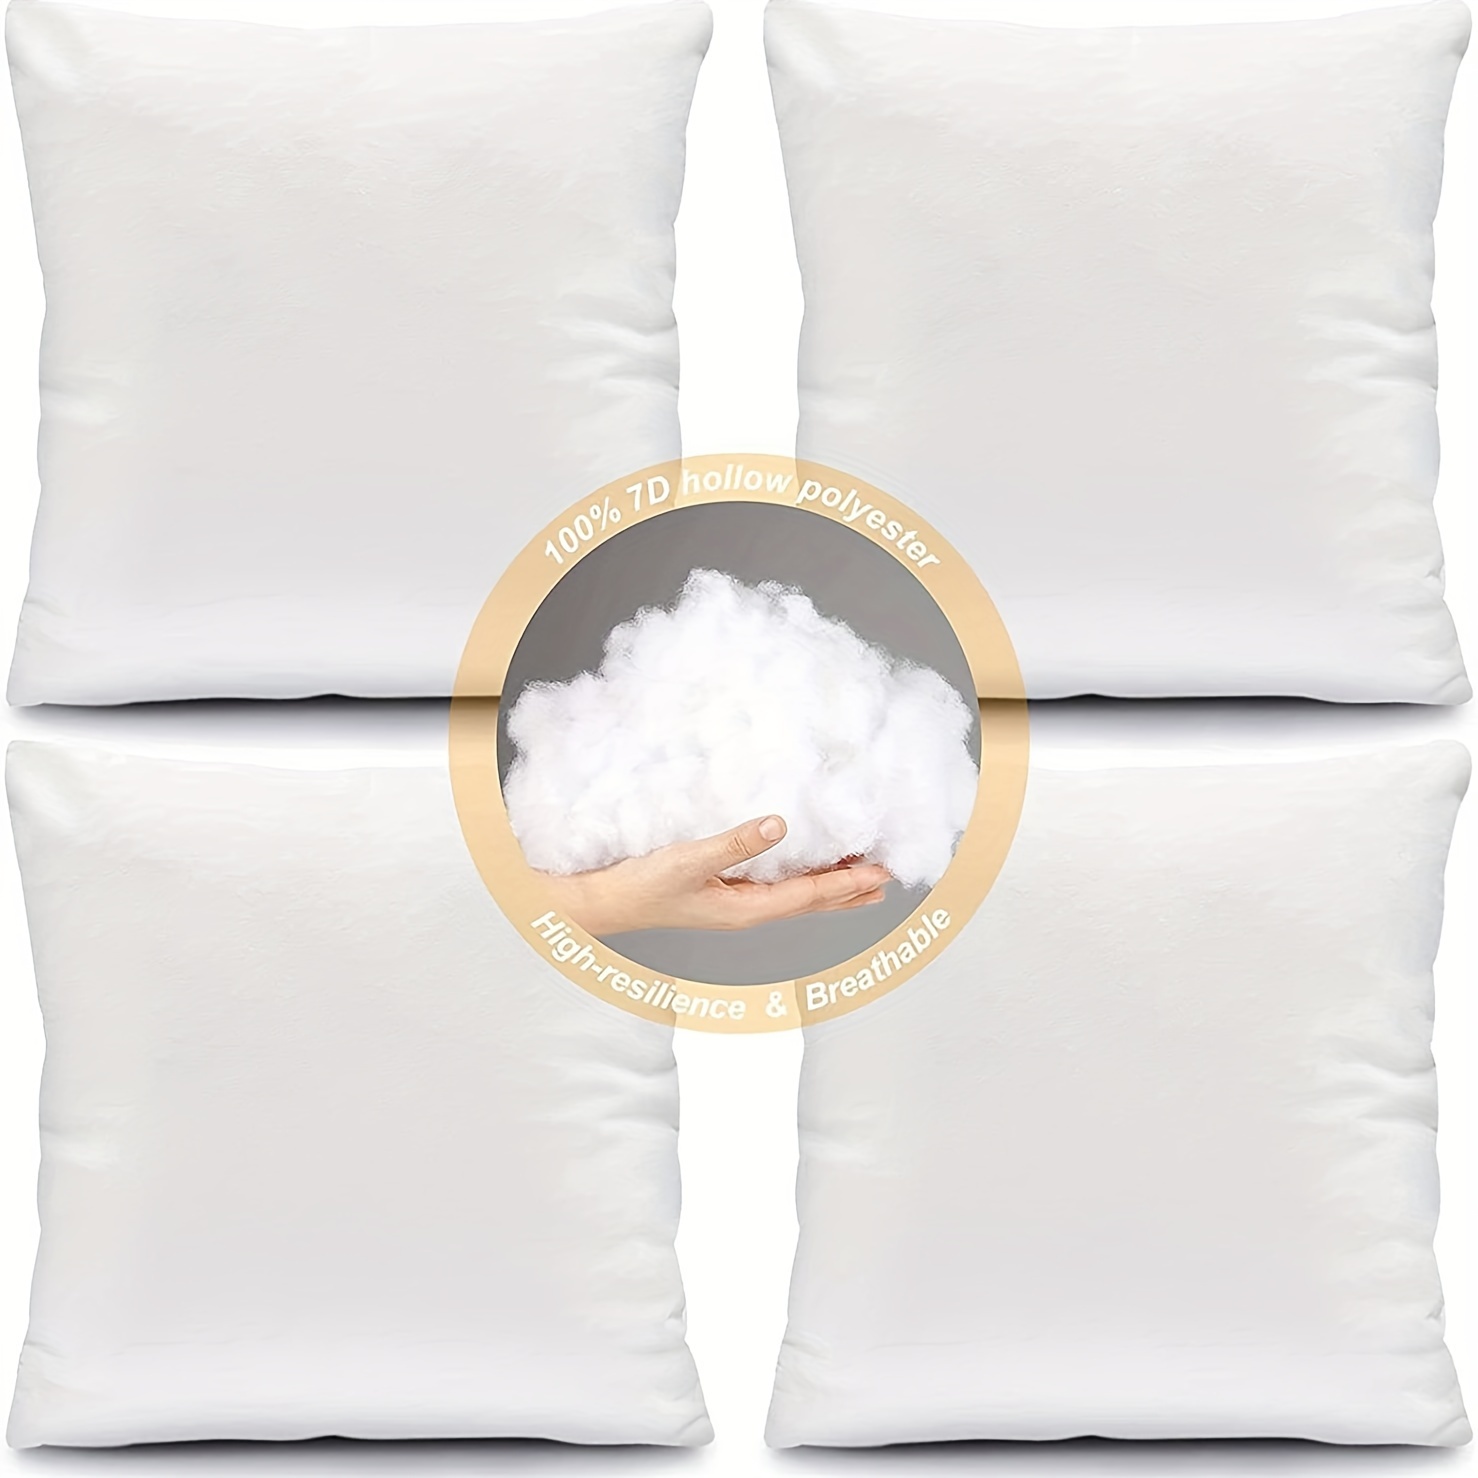 Decorative Throw Pillow Insert: Set of 4 Square Soft (White, 18x18) For  Sofa, Bench, Bed, Auto Seat Hypoallergenic Bed Couch Sofa- Indoor  Decorative Cushion 